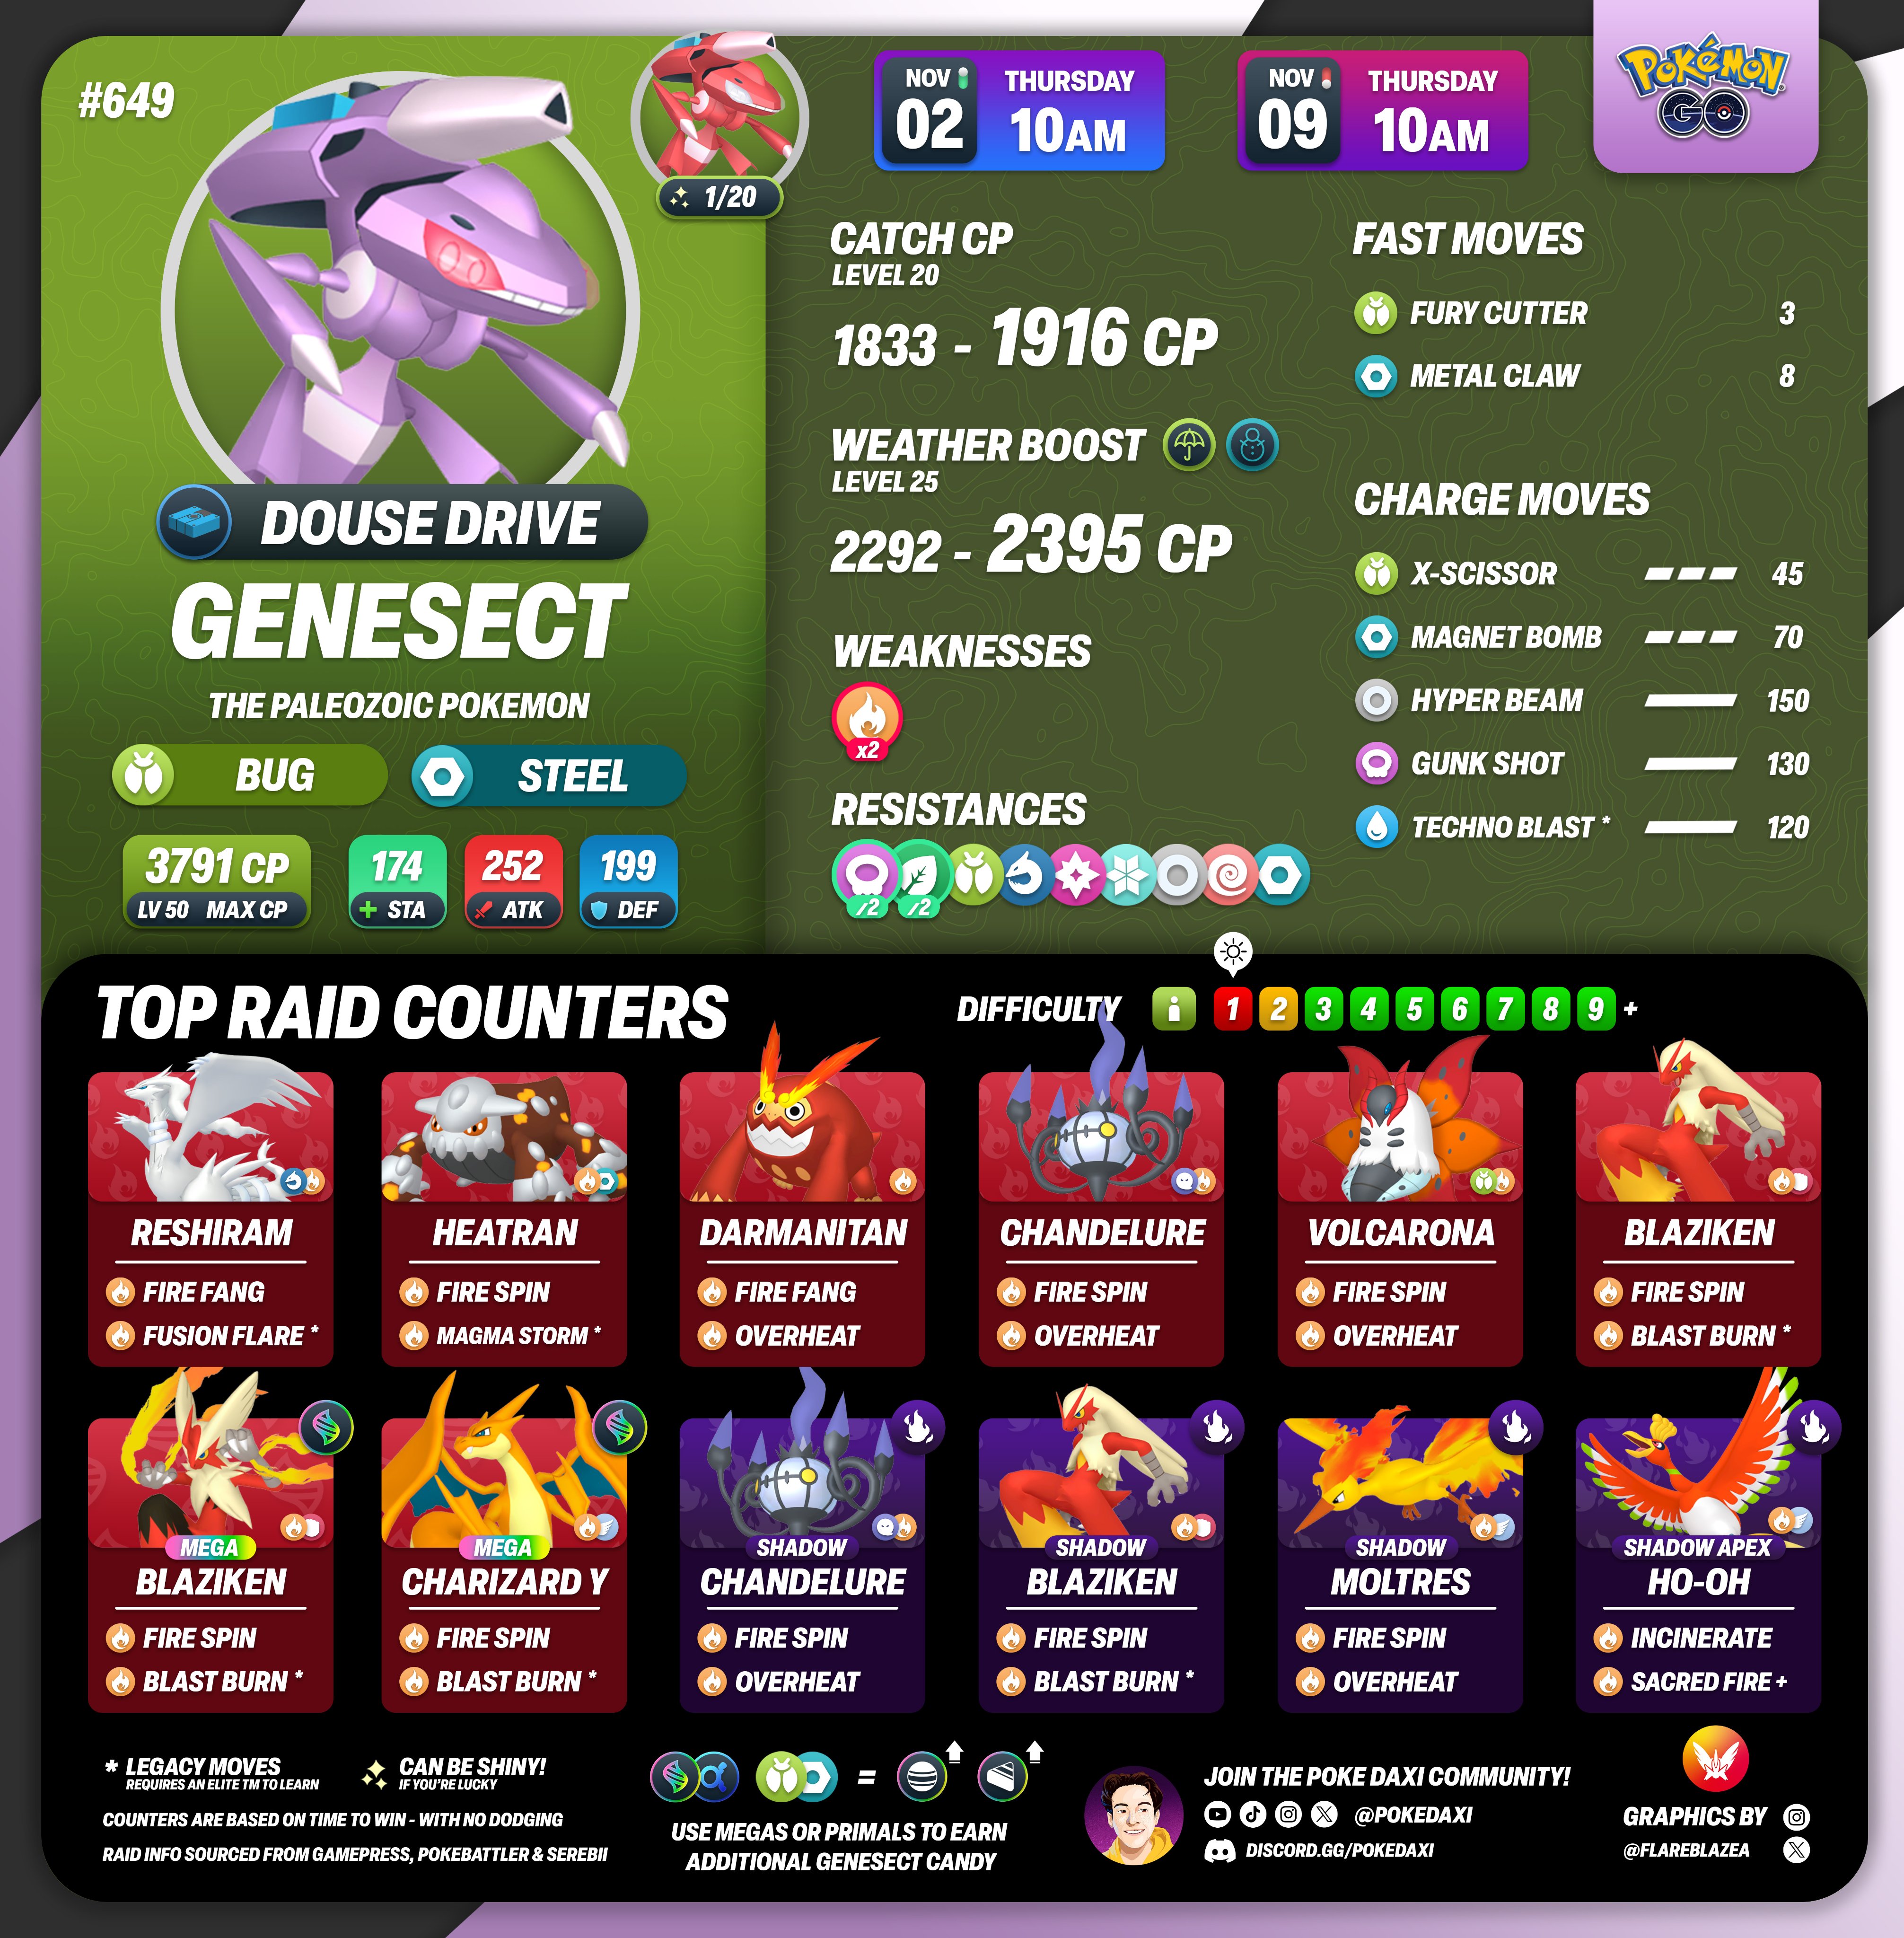 Pokemon GO Douse Drive Genesect raid guide: Best counters